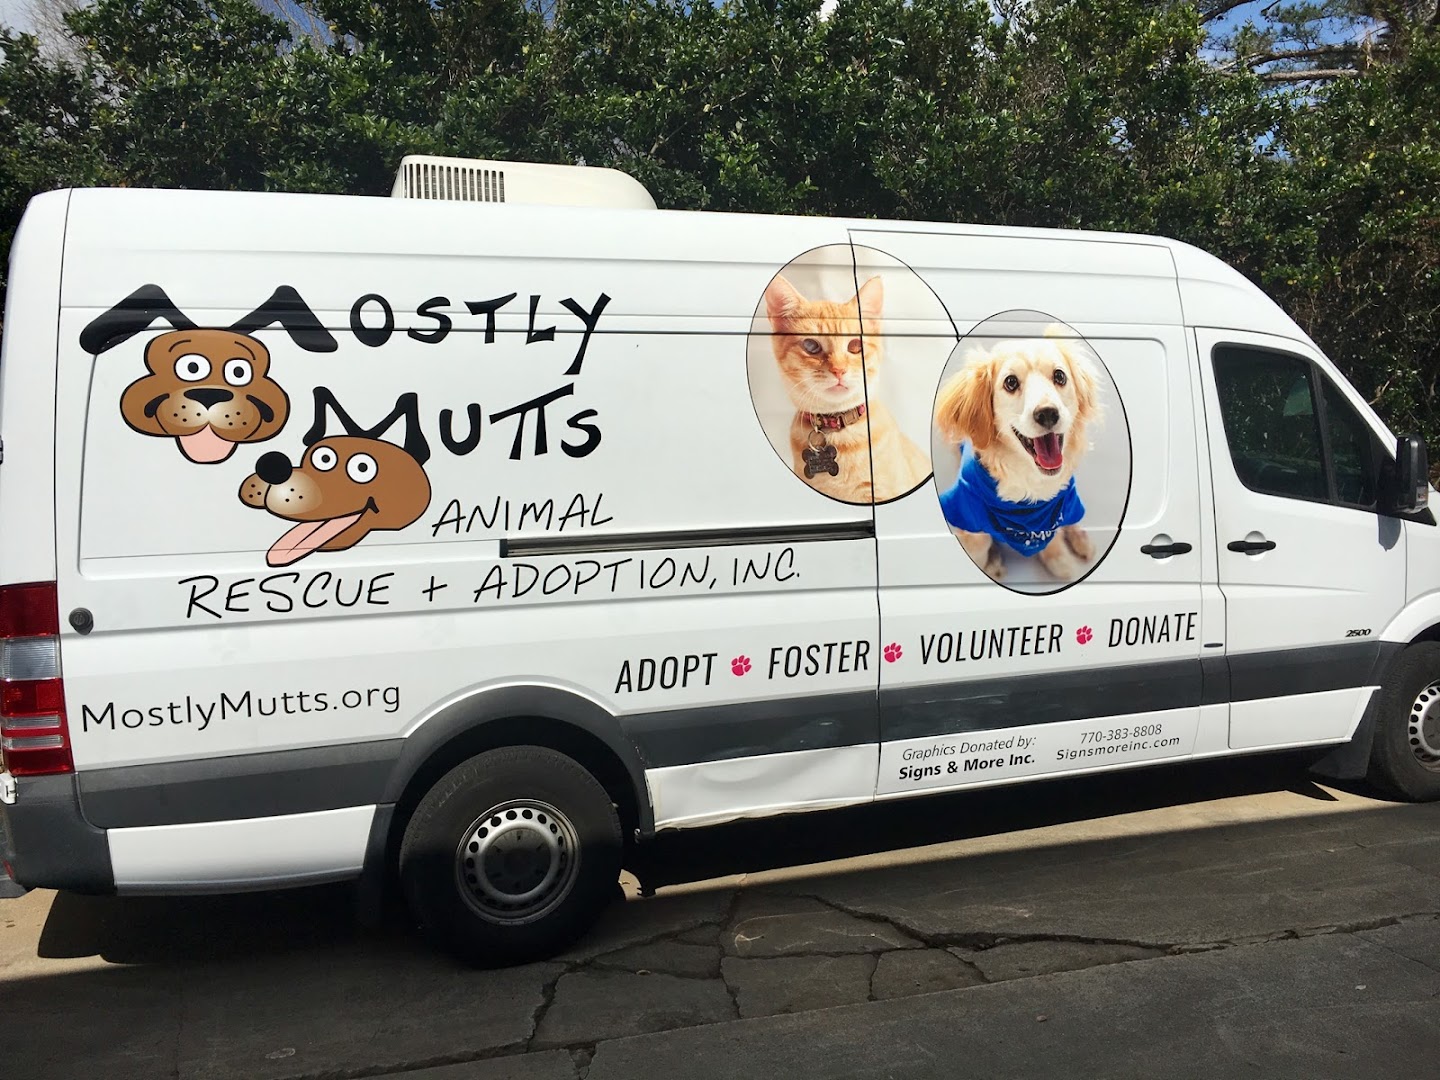 Mostly Mutts Animal Rescue and Adoption